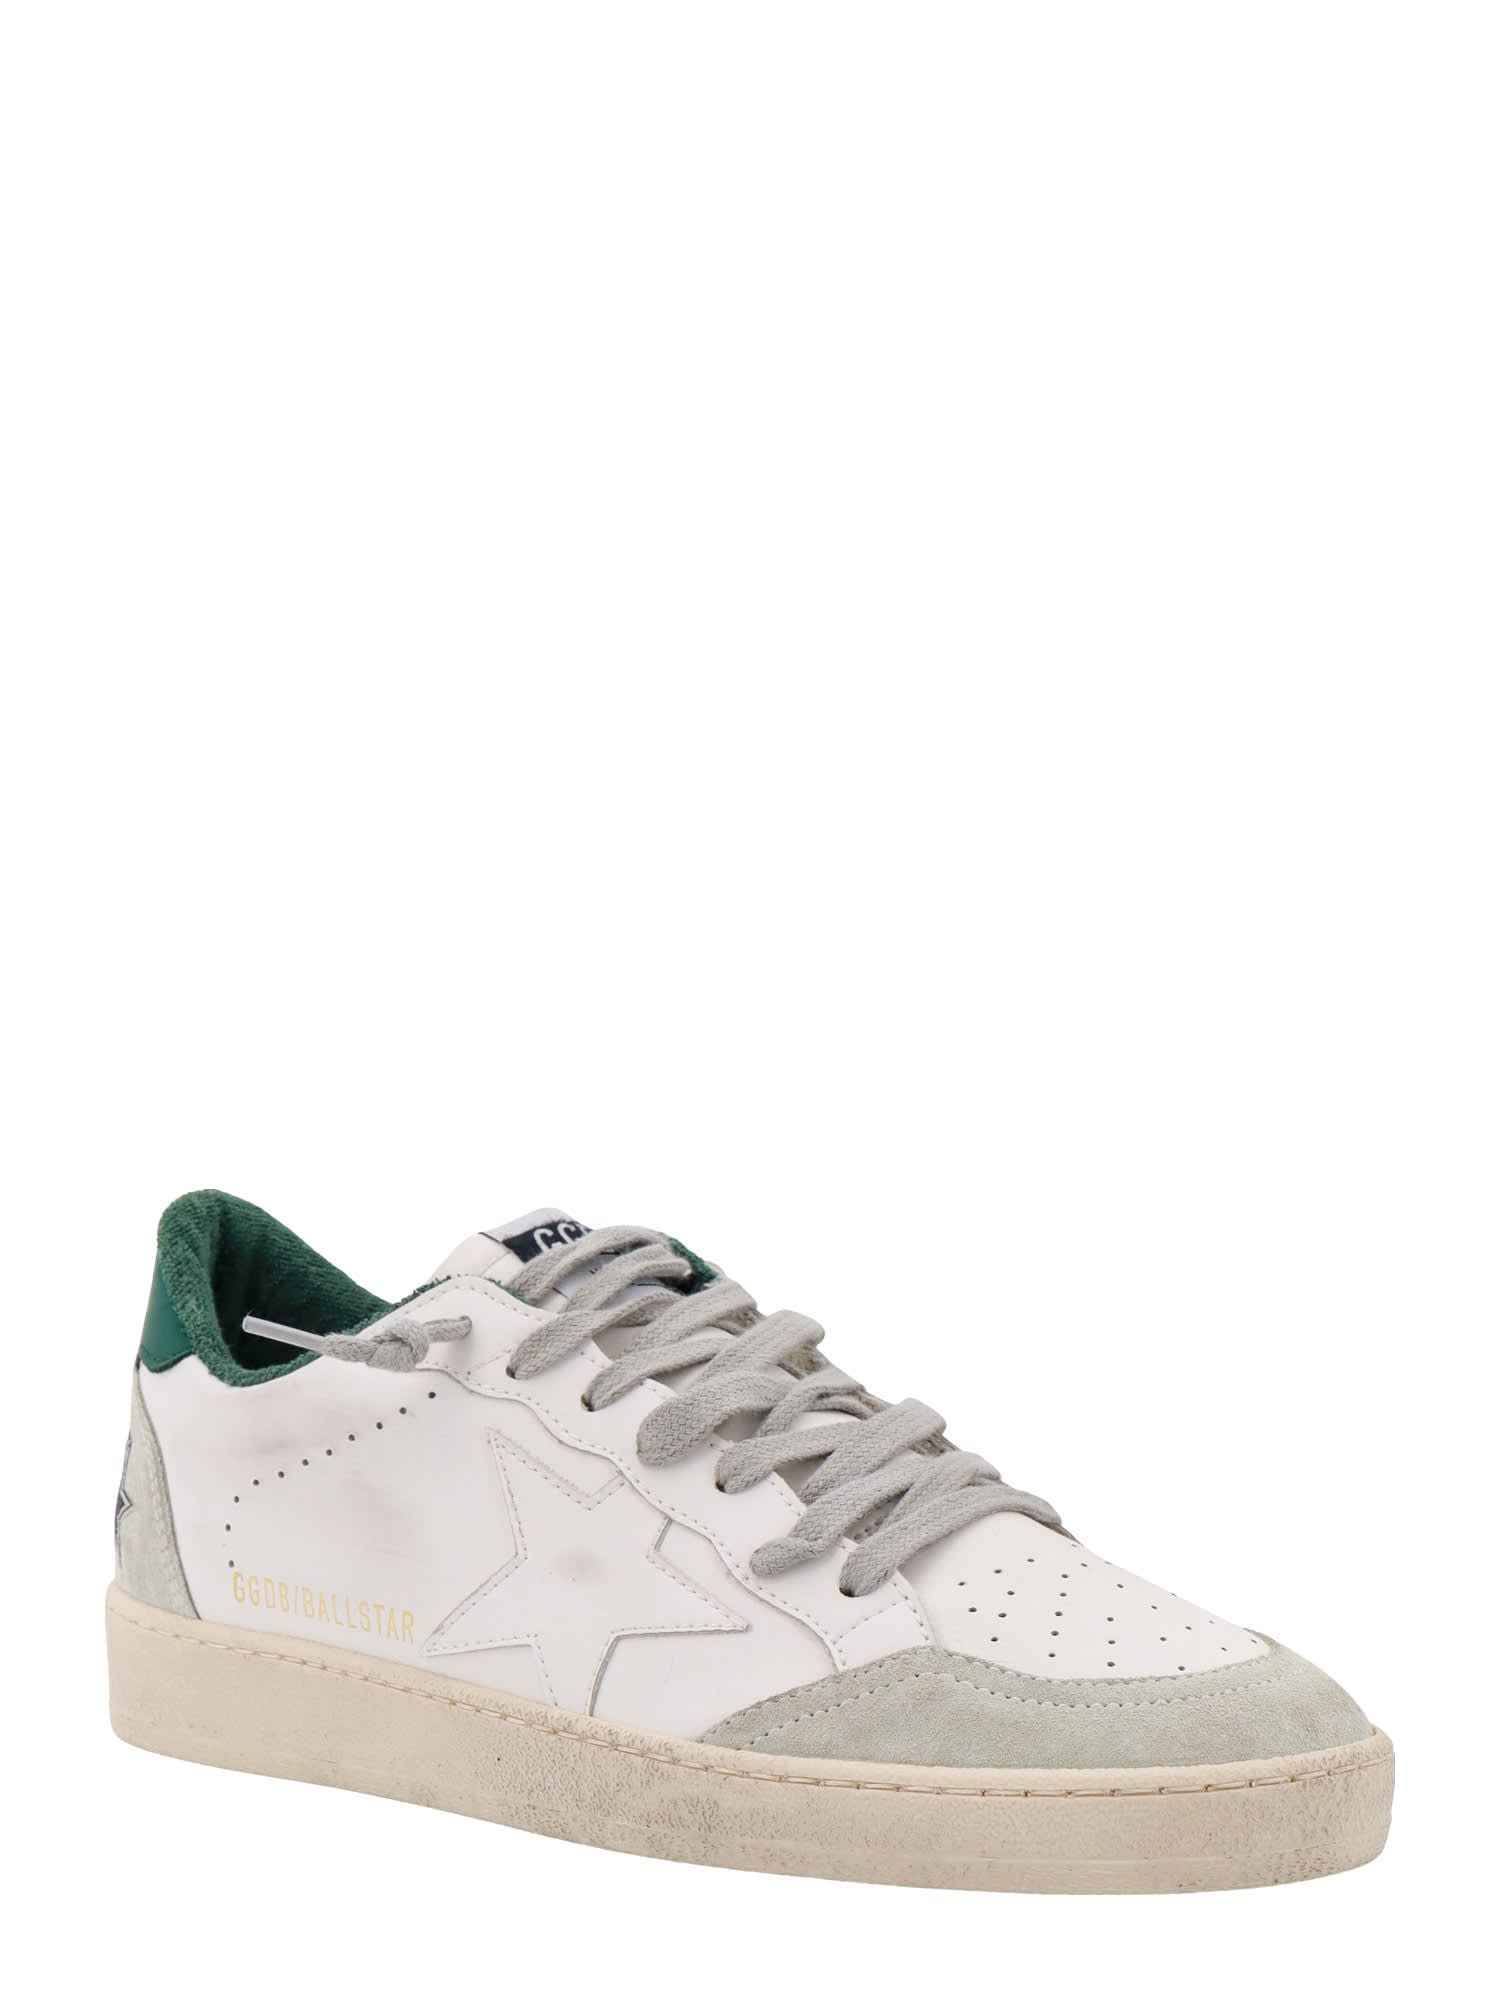 Shop Golden Goose Ball Star Sneakers In White Ice Green